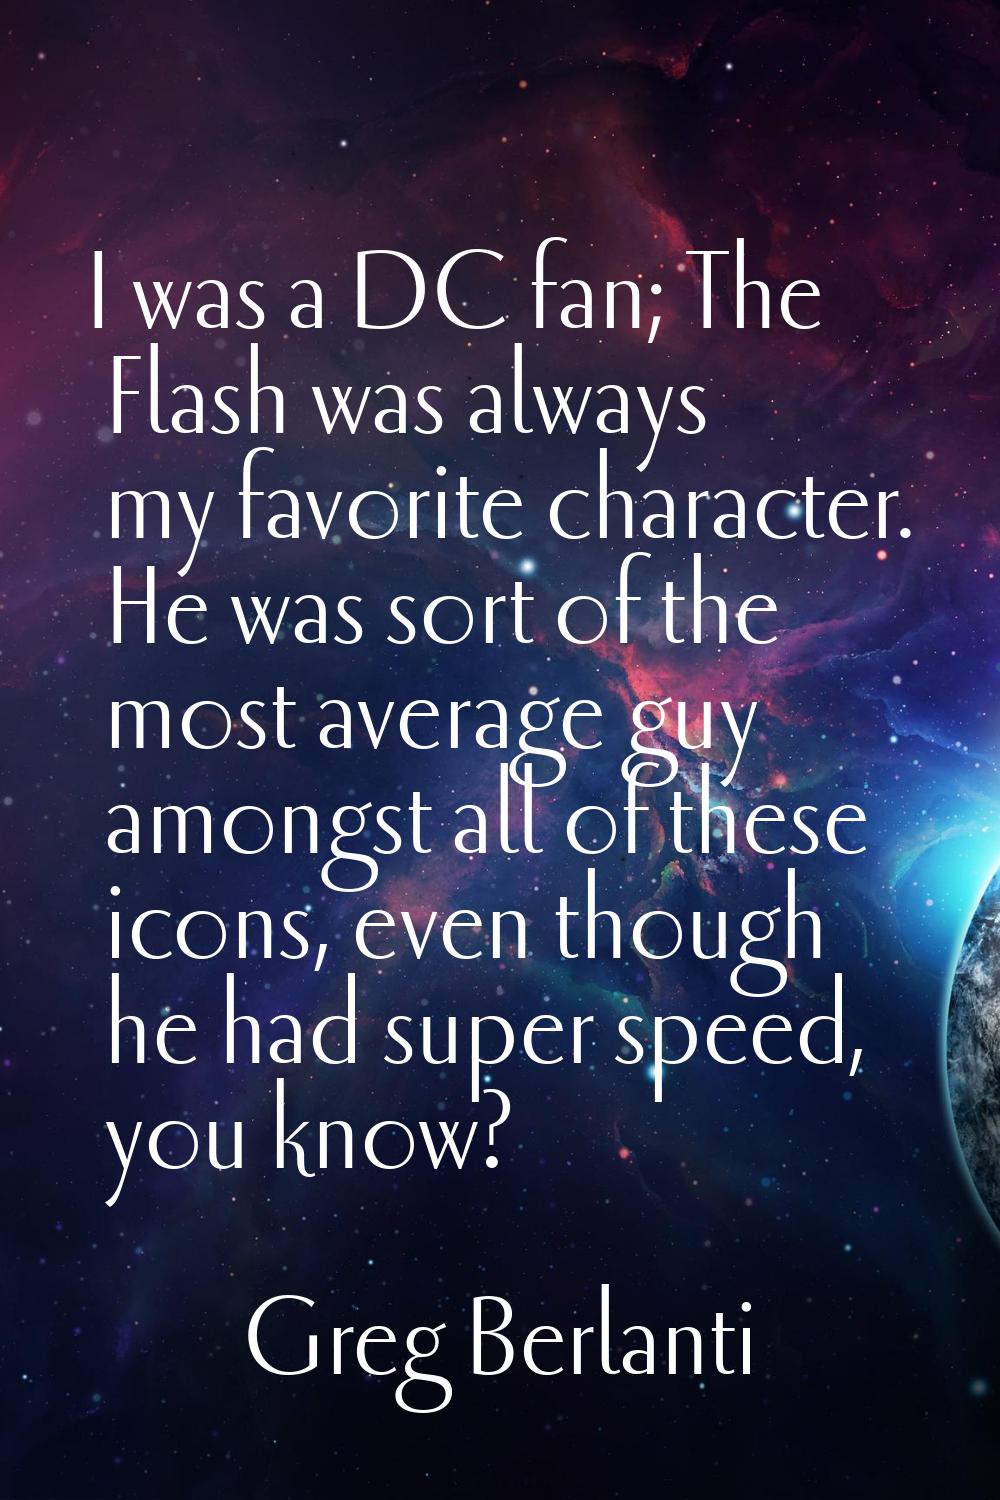 I was a DC fan; The Flash was always my favorite character. He was sort of the most average guy amo